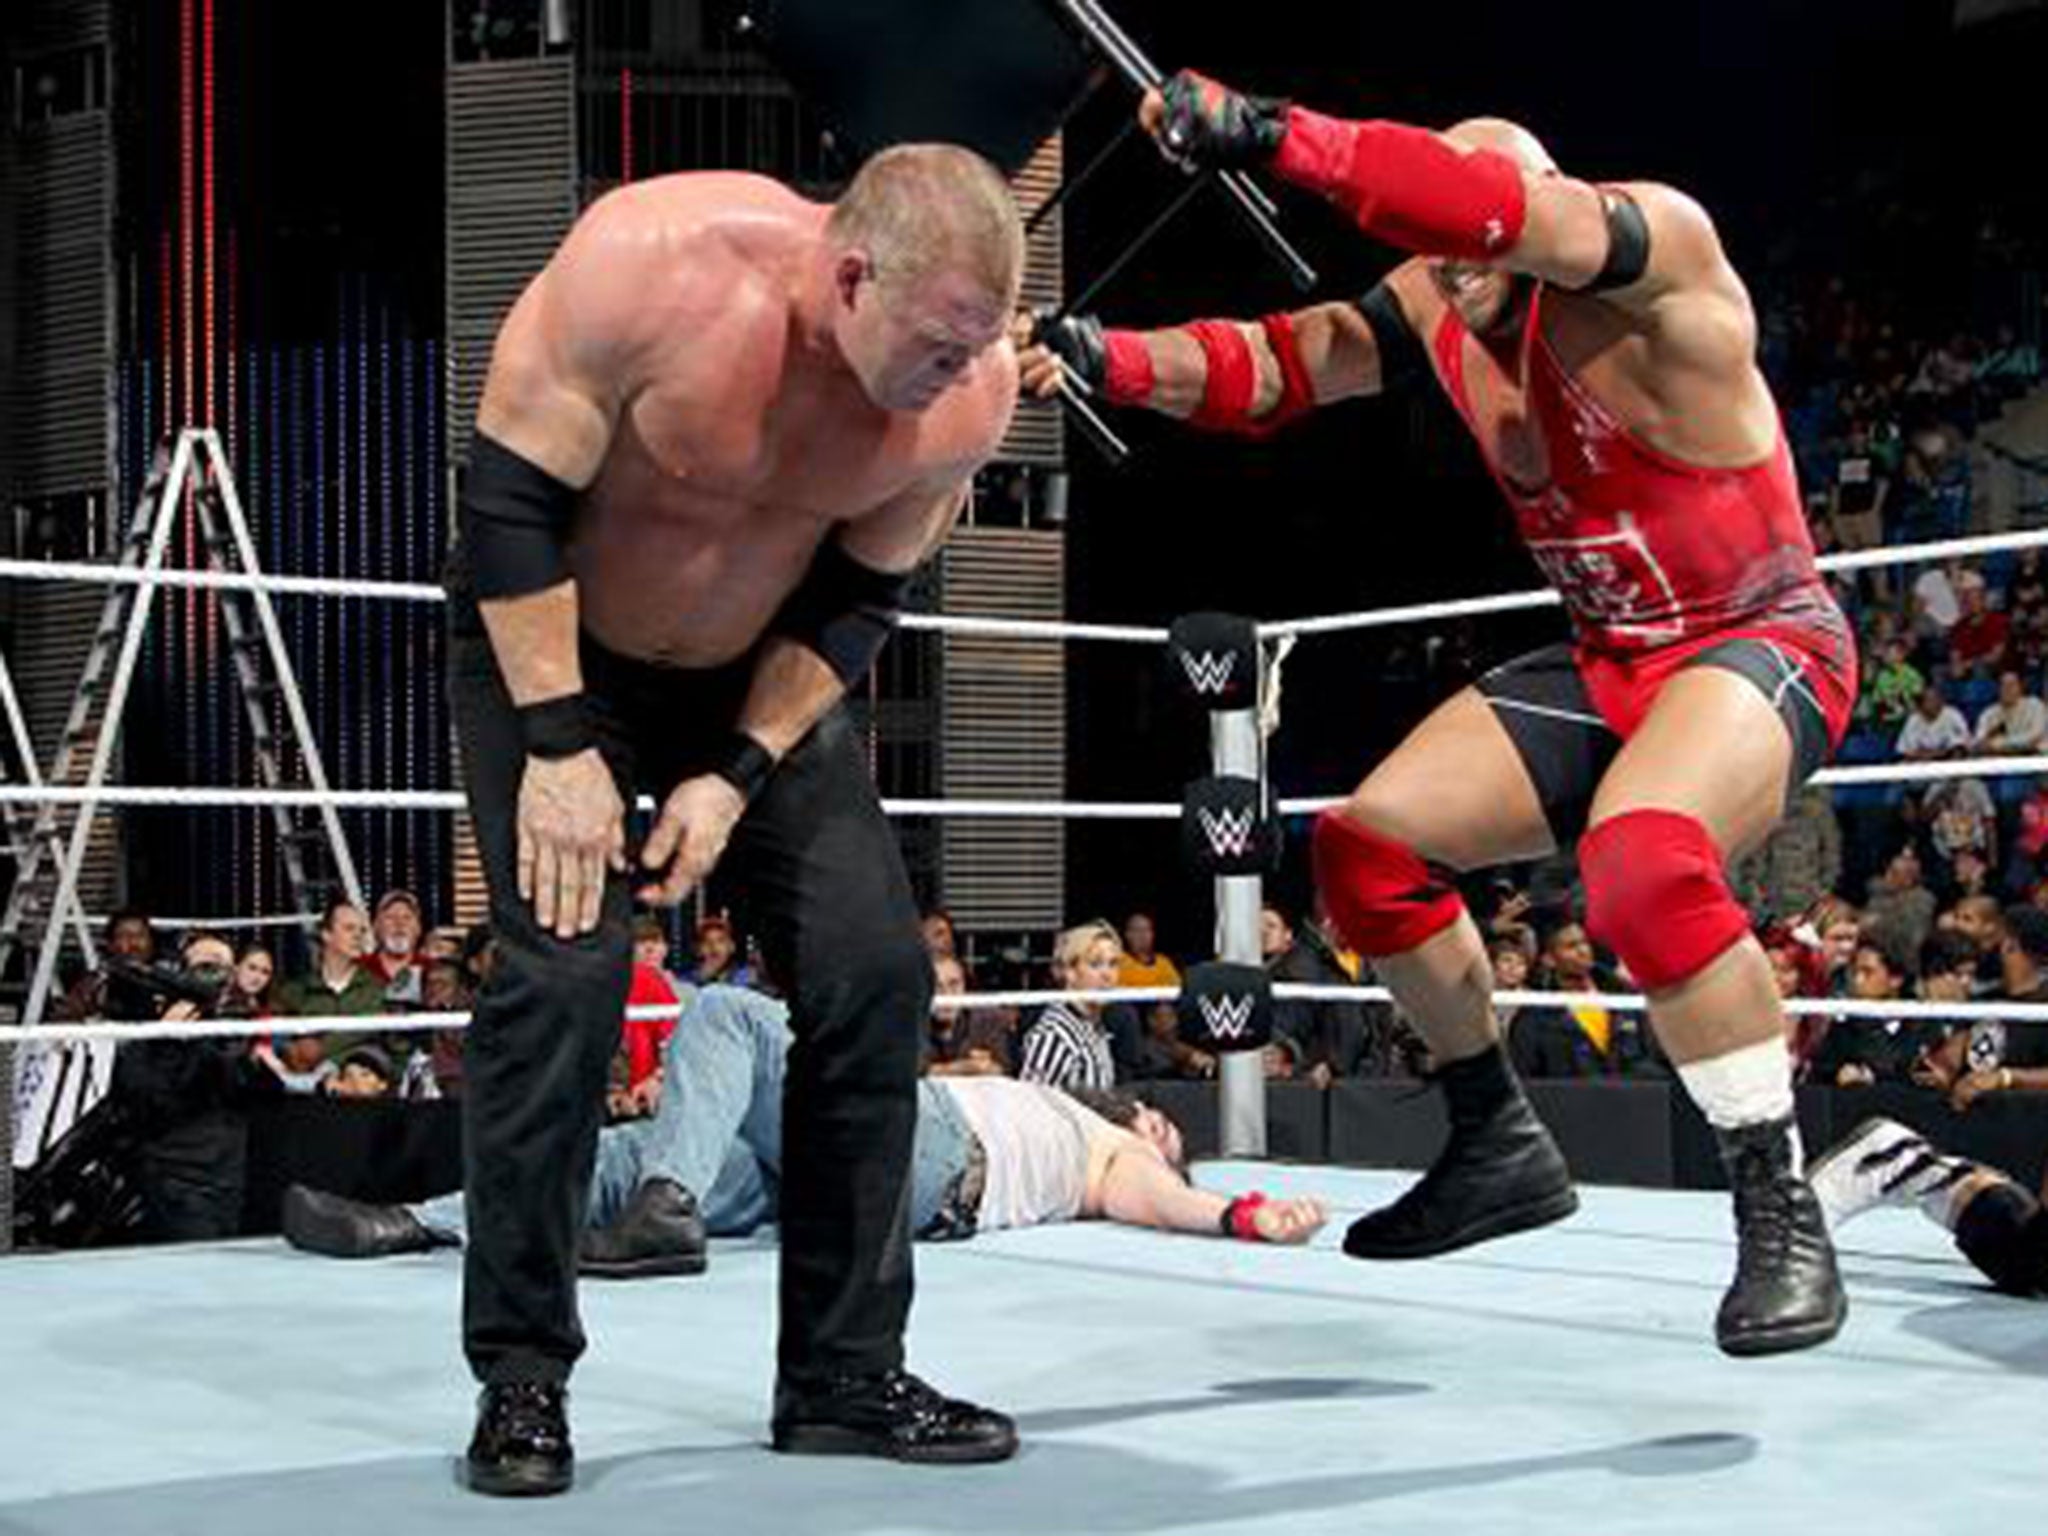 Ryback hits Kane with a chair